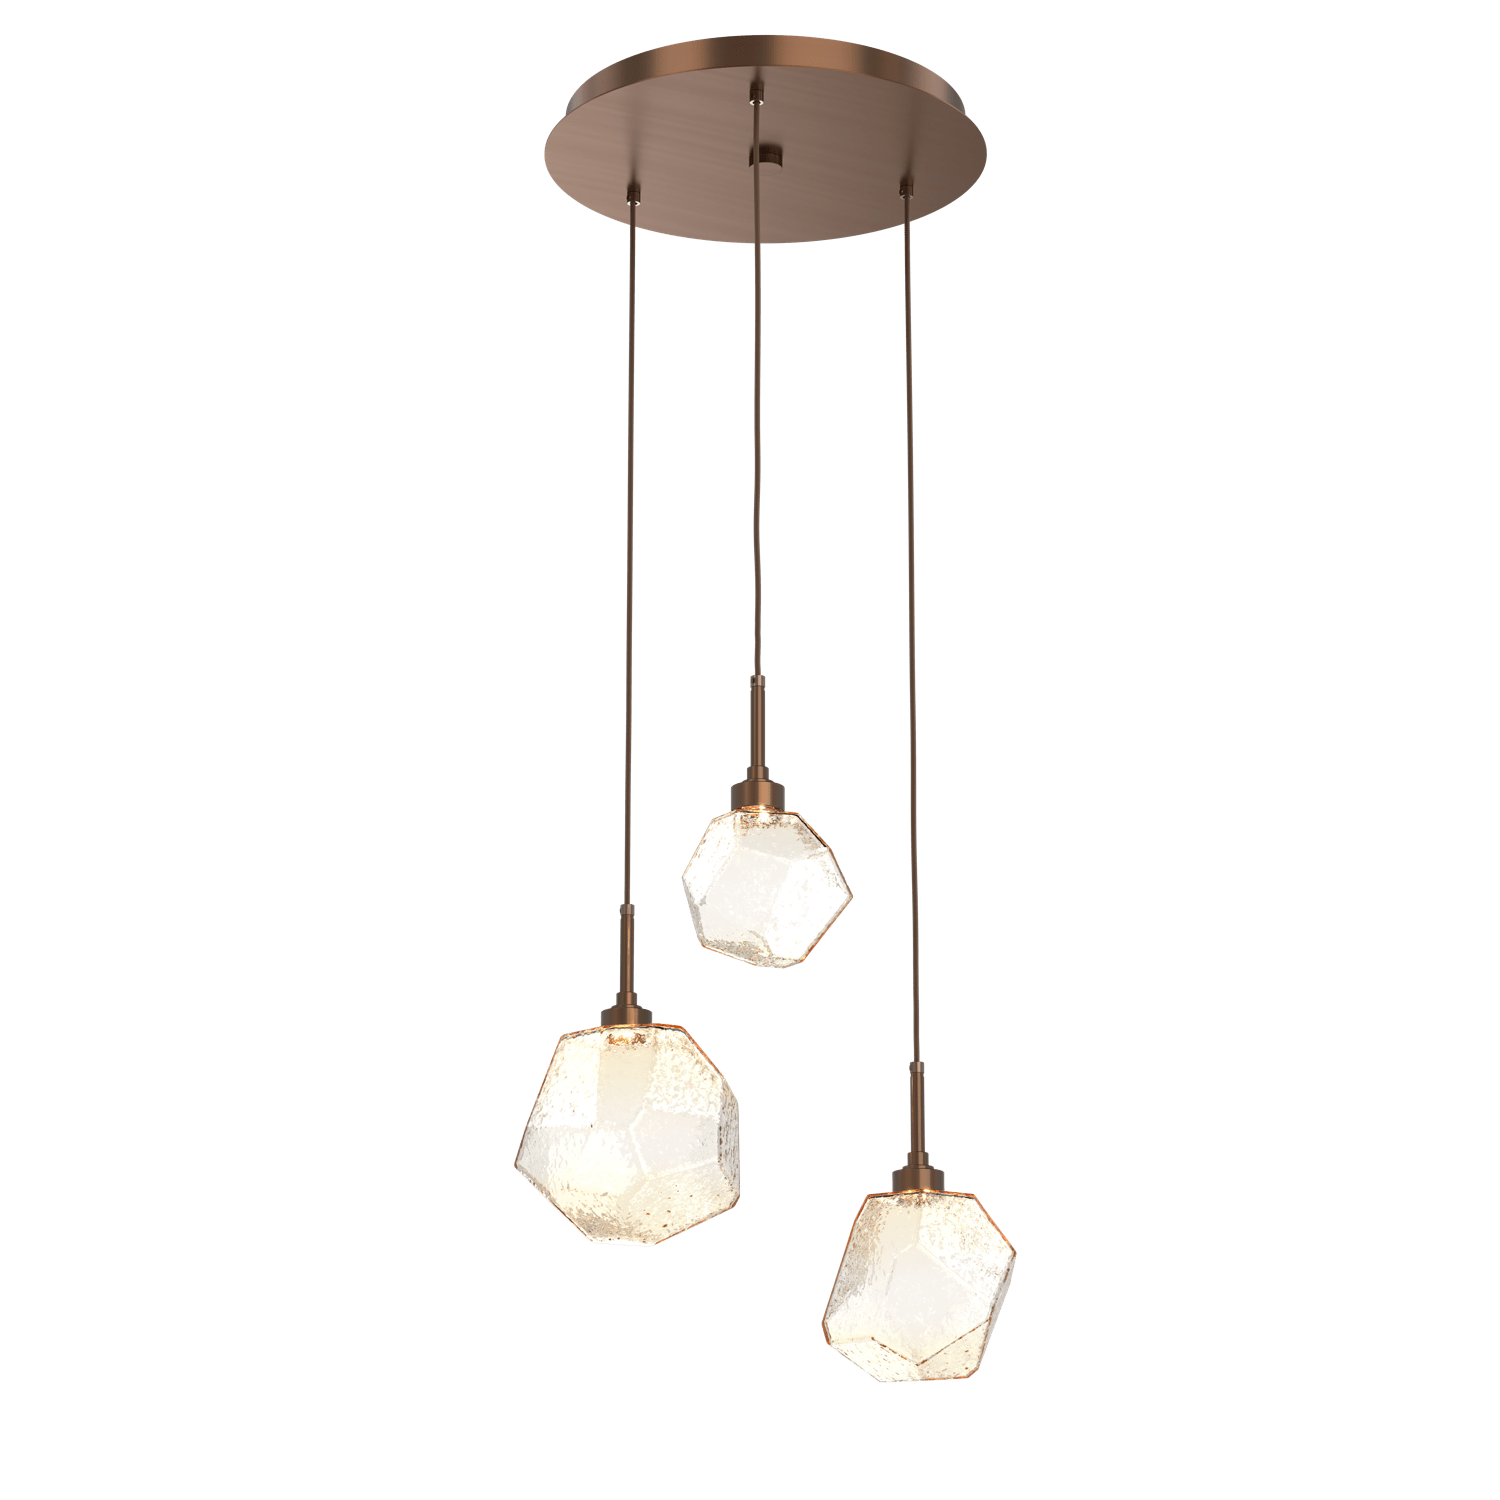 CHB0039-03-RB-A-Hammerton-Studio-Gem-3-light-round-pendant-chandelier-with-oil-rubbed-bronze-finish-and-amber-blown-glass-shades-and-LED-lamping